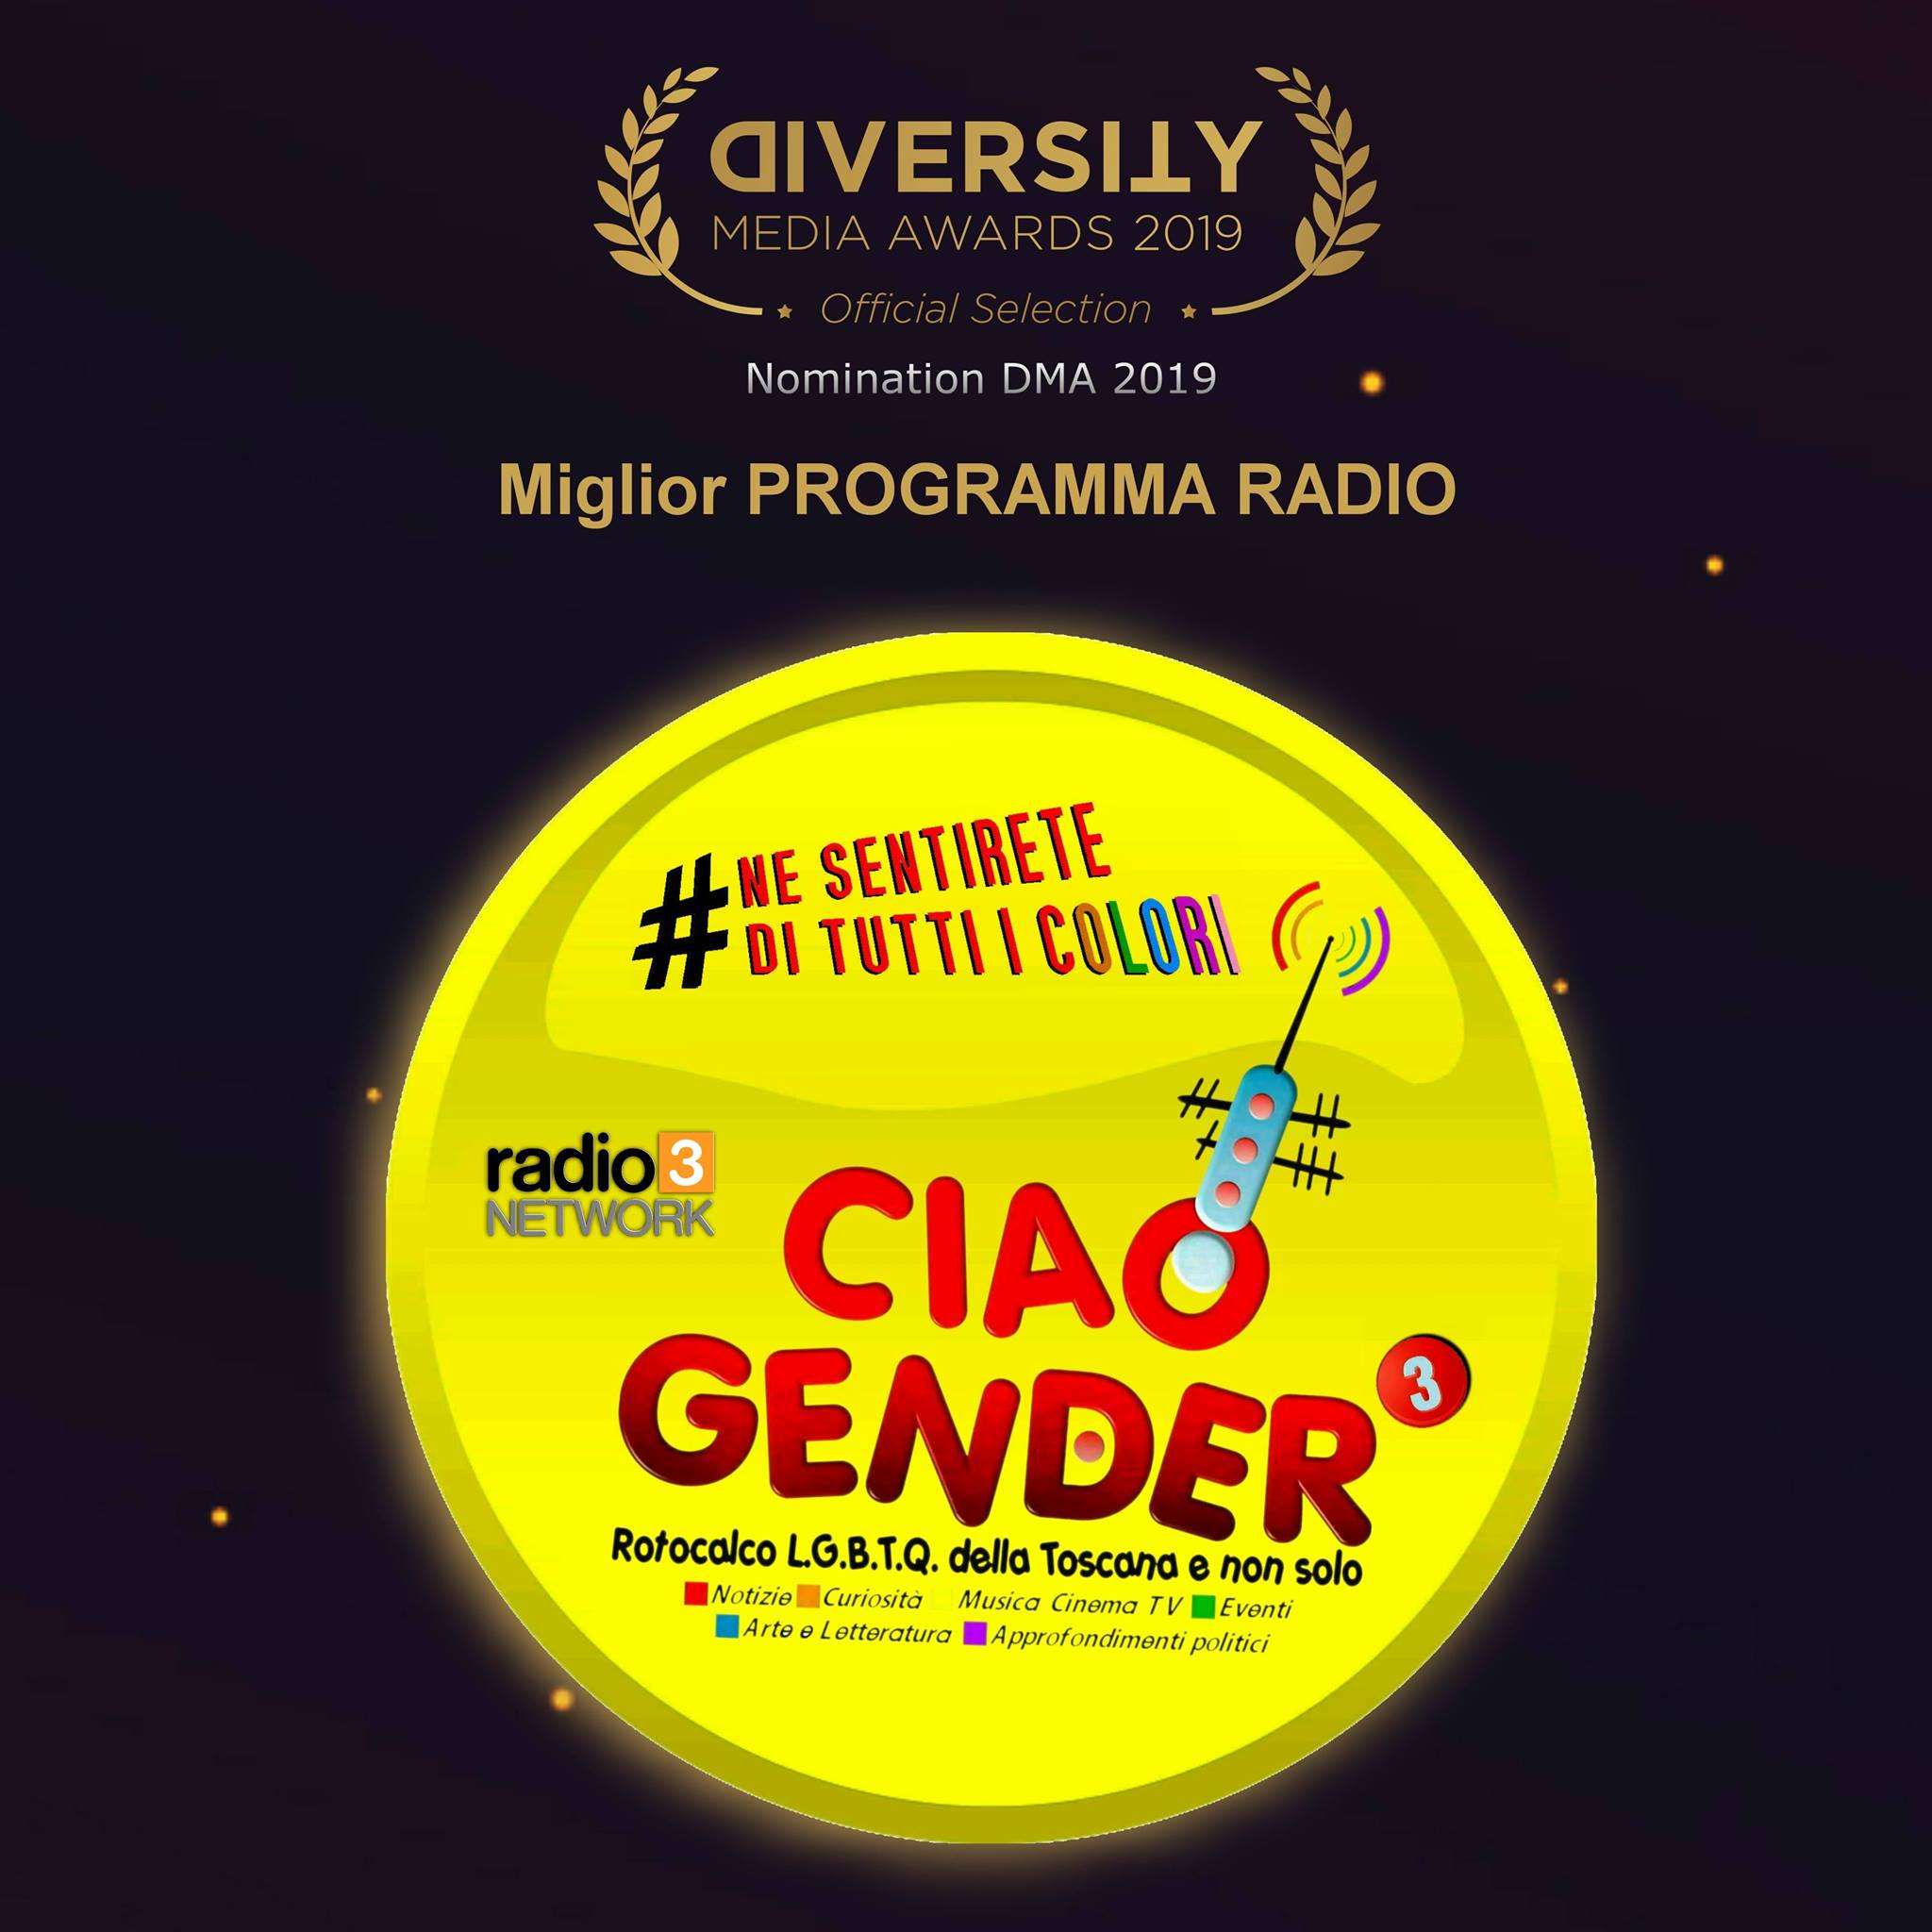 Ciao Gender